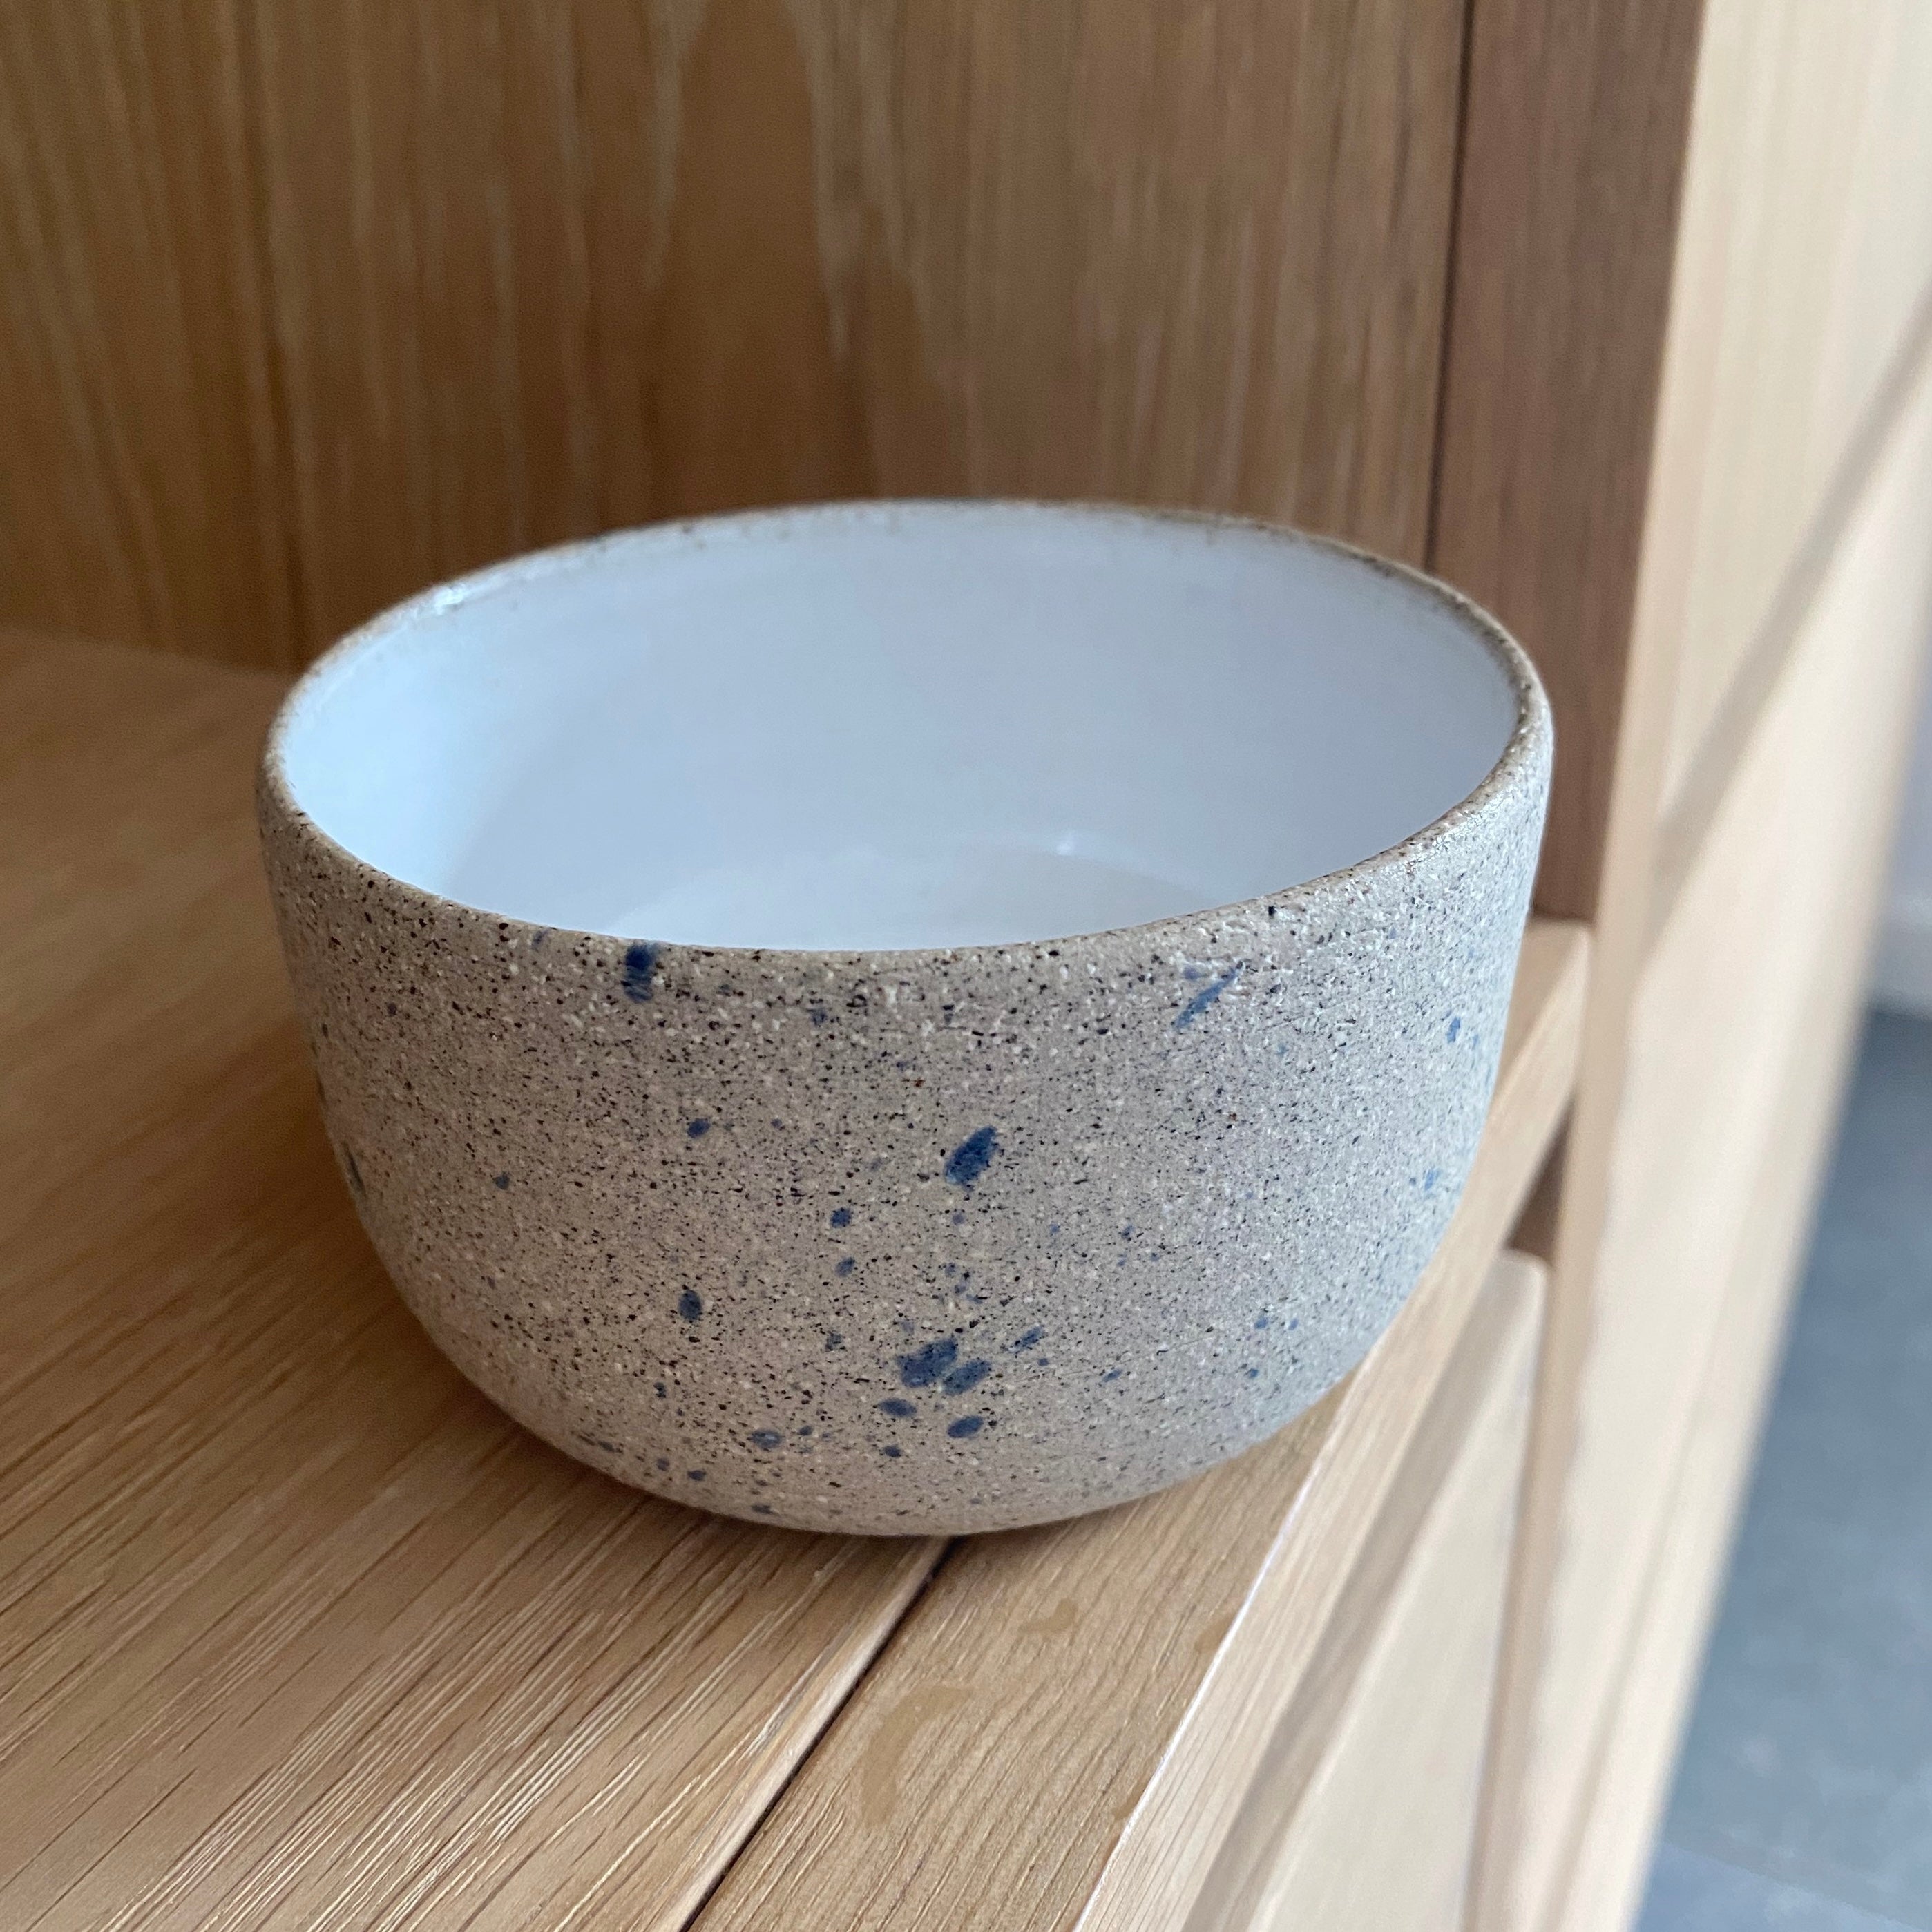 Tasja P bowl Mirabelle - Sand colored with blue sparkles